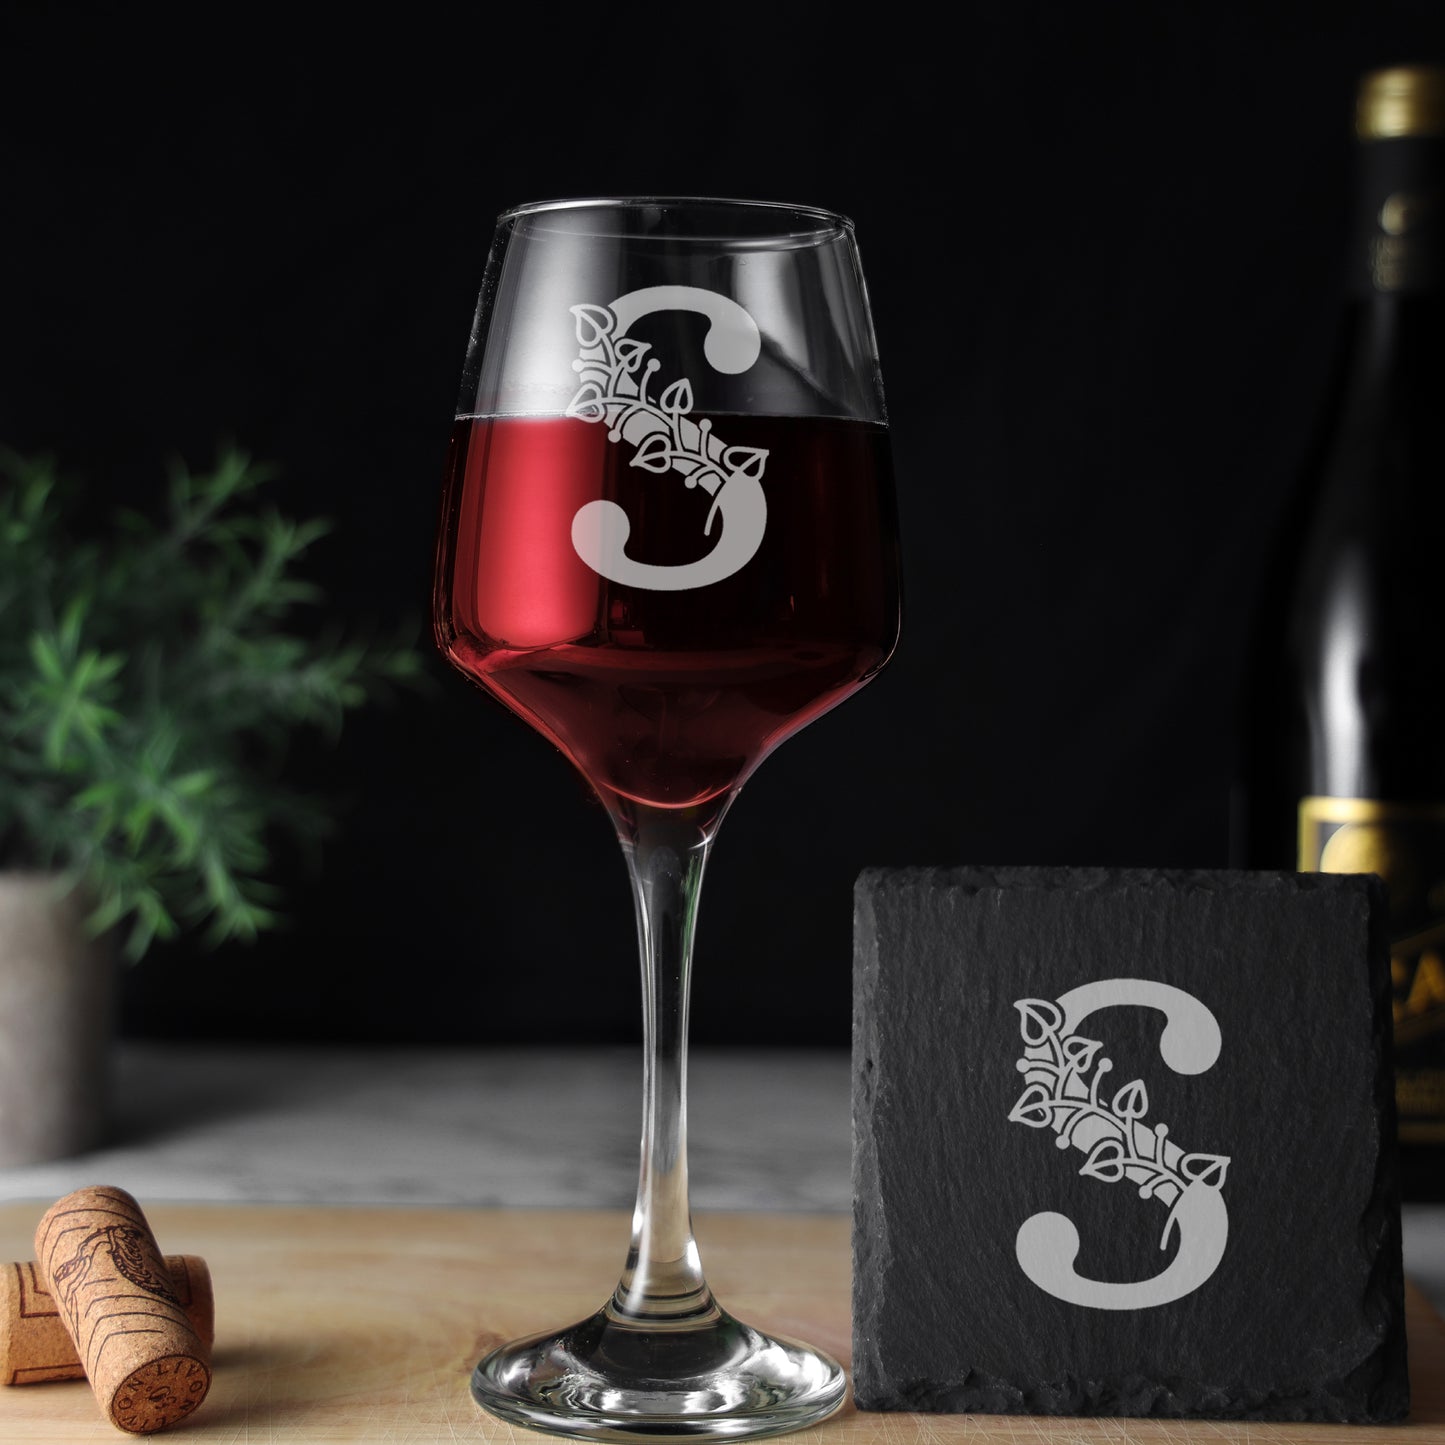 Personalised Engraved Monogram Initial Design Wine Glass and/or Coaster Gift  - Always Looking Good -   